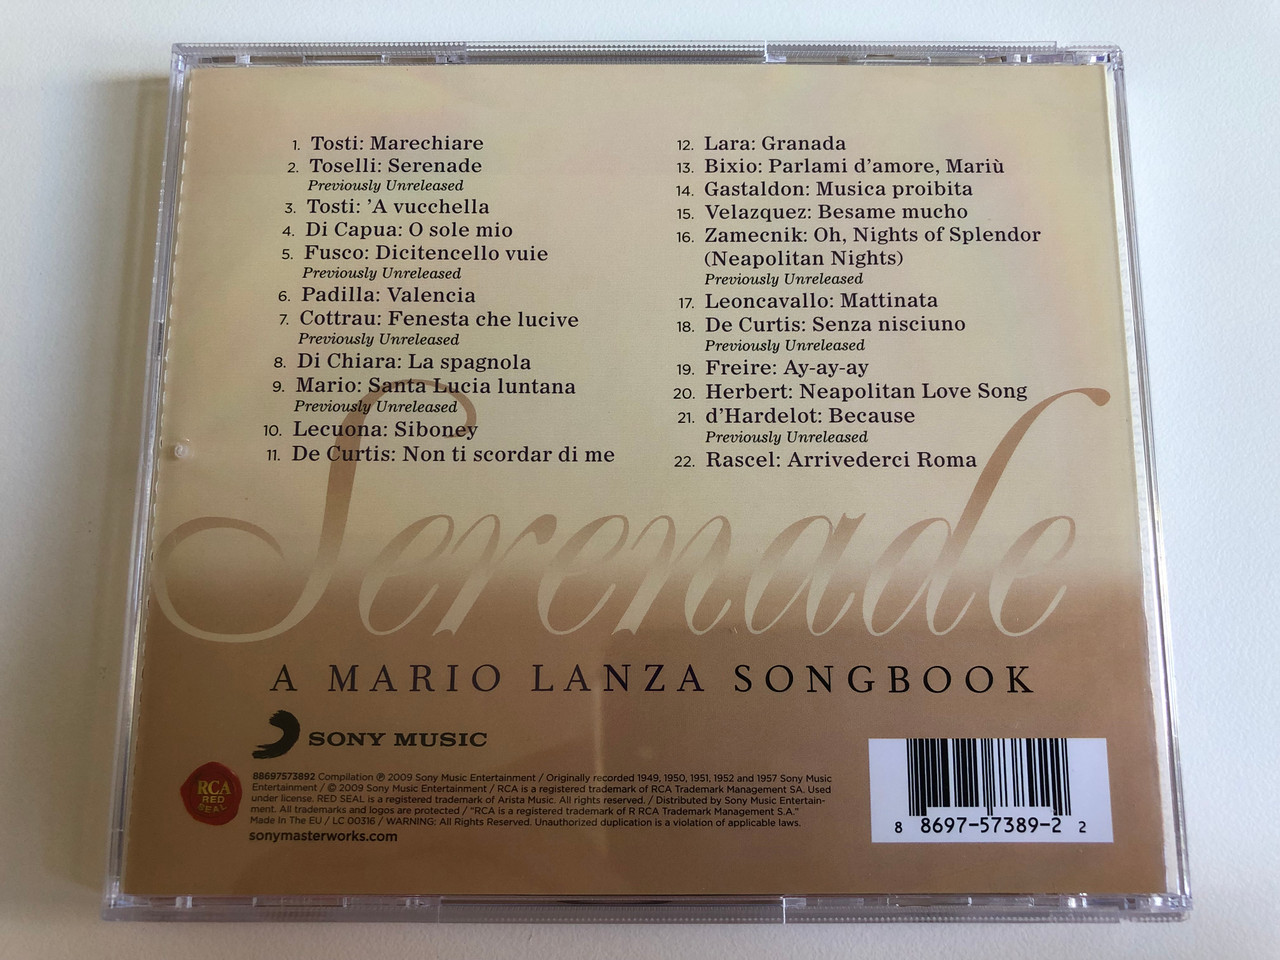 https://cdn10.bigcommerce.com/s-62bdpkt7pb/products/0/images/208110/Serenade_-_Mario_Lanza_-_Songbook_The_Ultimate_Collection_Featuring_7_Previously_Unreleased_Recordings_RCA_Red_Seal_Audio_CD_2009_88697573892_4__83136.1642659735.1280.1280.JPG?c=2&_gl=1*r6i08d*_ga*MjA2NTIxMjE2MC4xNTkwNTEyNTMy*_ga_WS2VZYPC6G*MTY0MjY1NTc3MC4yNjcuMS4xNjQyNjU5NTE2LjQy